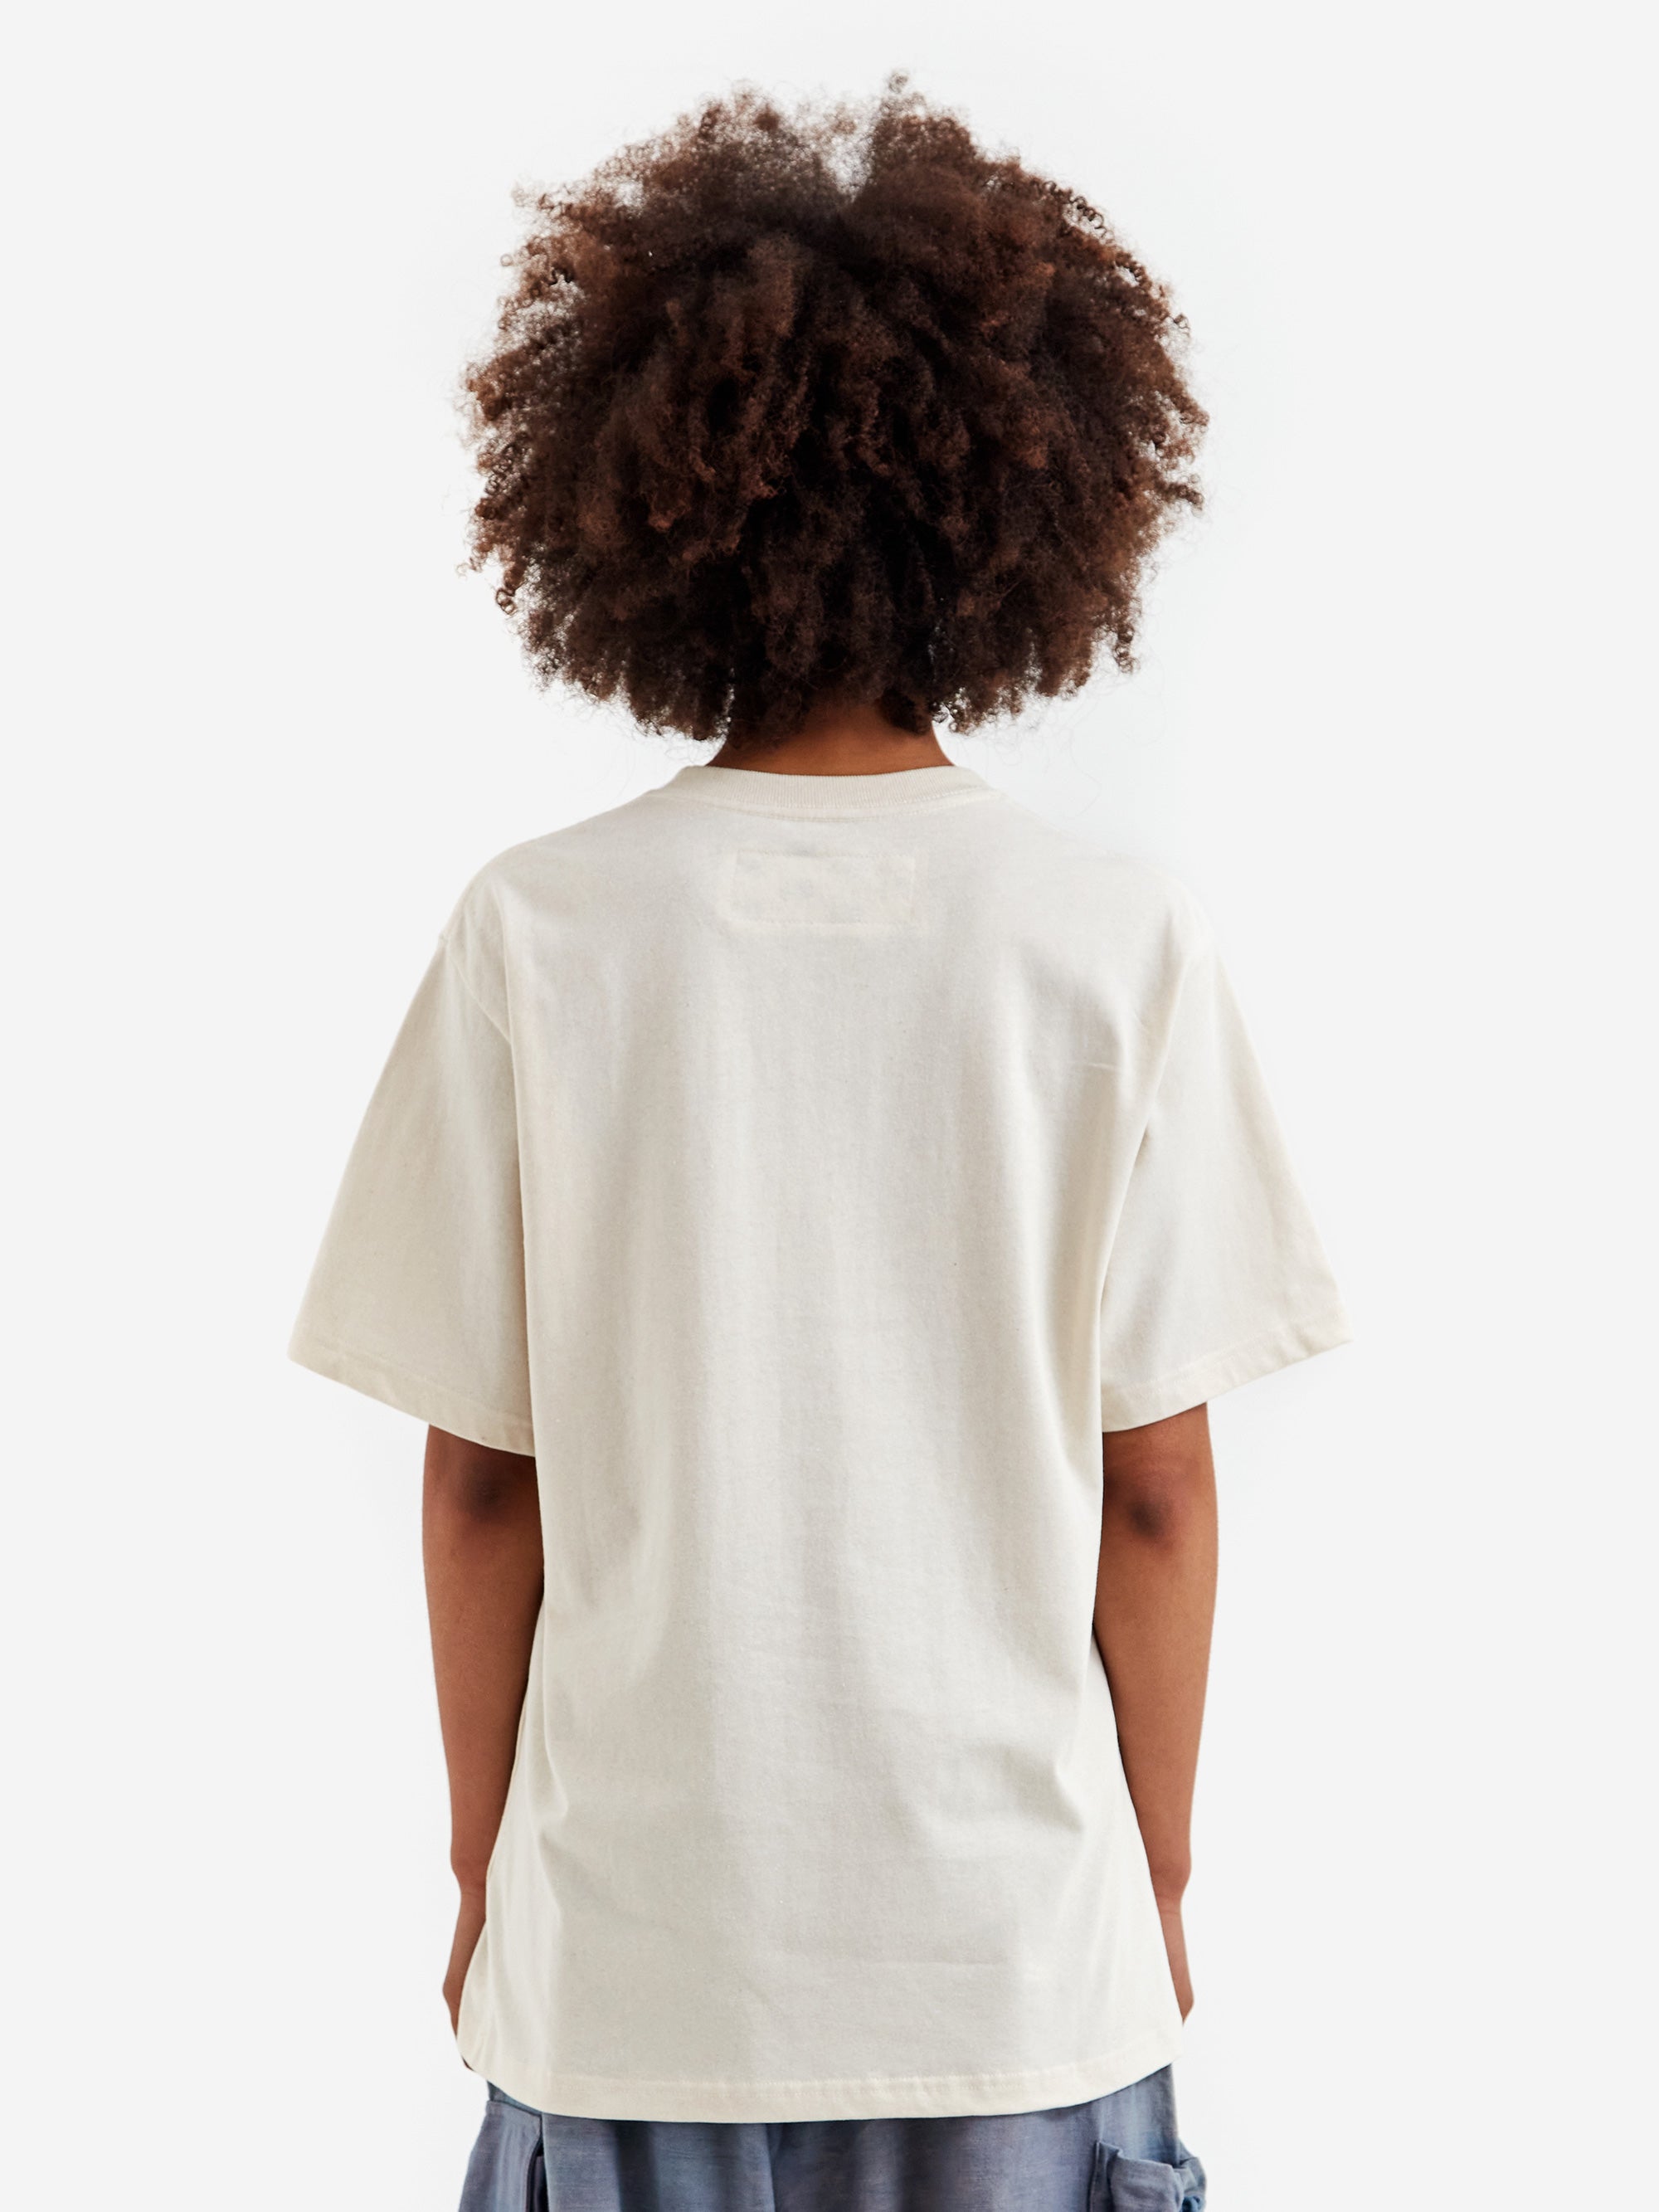 Gentle Fullness Recycled Cotton Short Sleeve T-Shirt W - Oatmeal